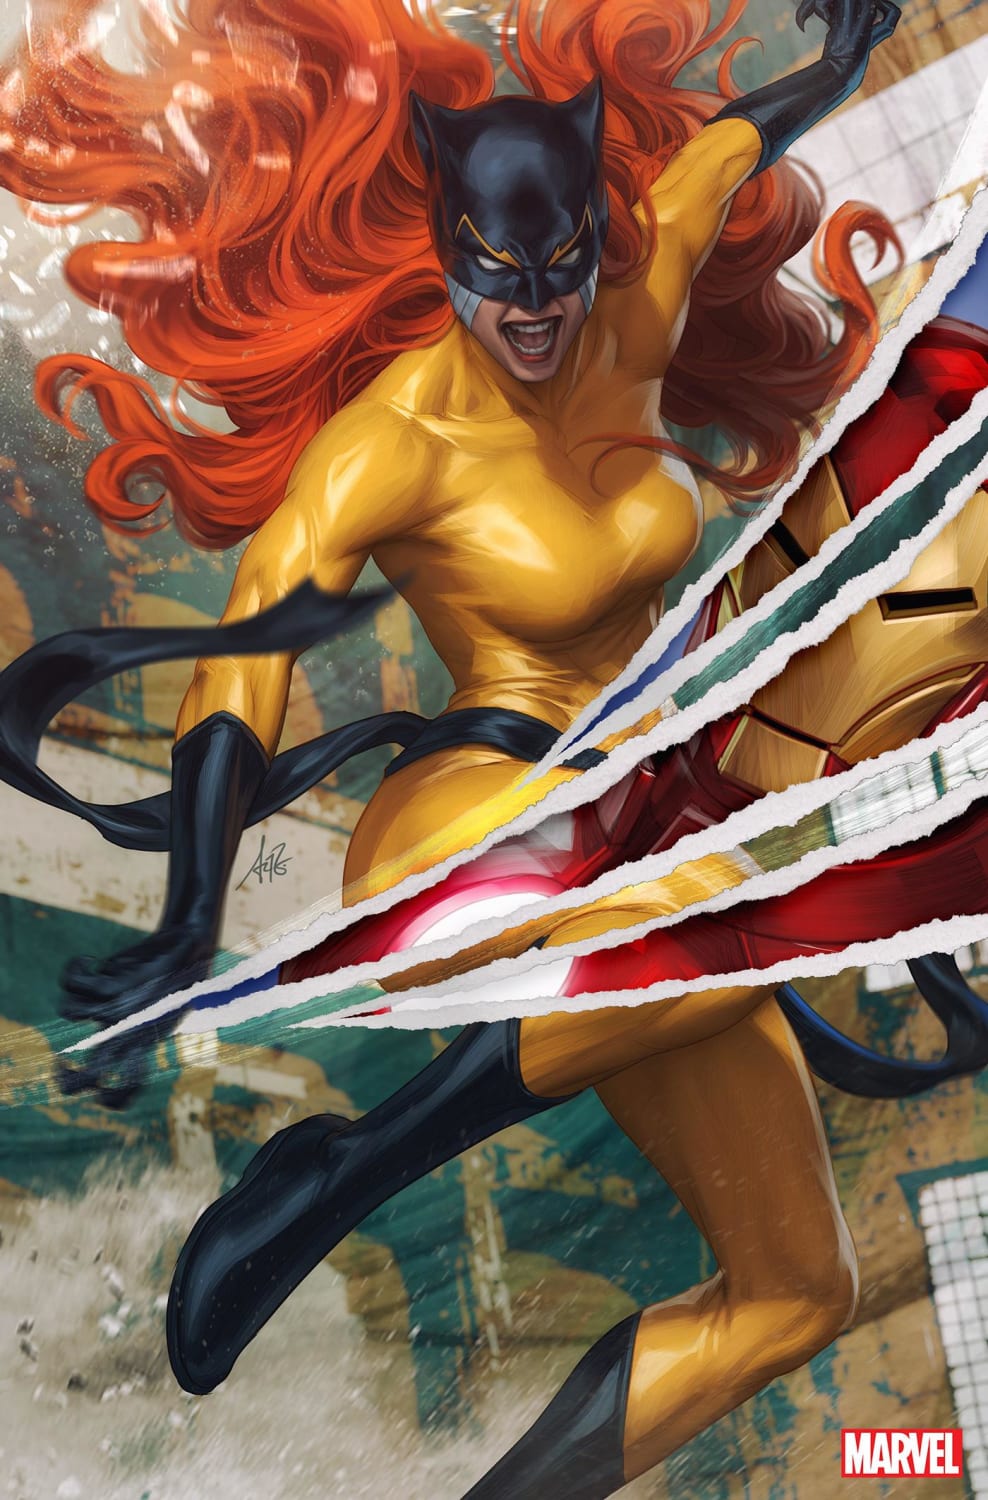 IRON MAN/HELLCAT ANNUAL 1 ARTGERM REALLY KILLED IT WITH THIS ONE!!